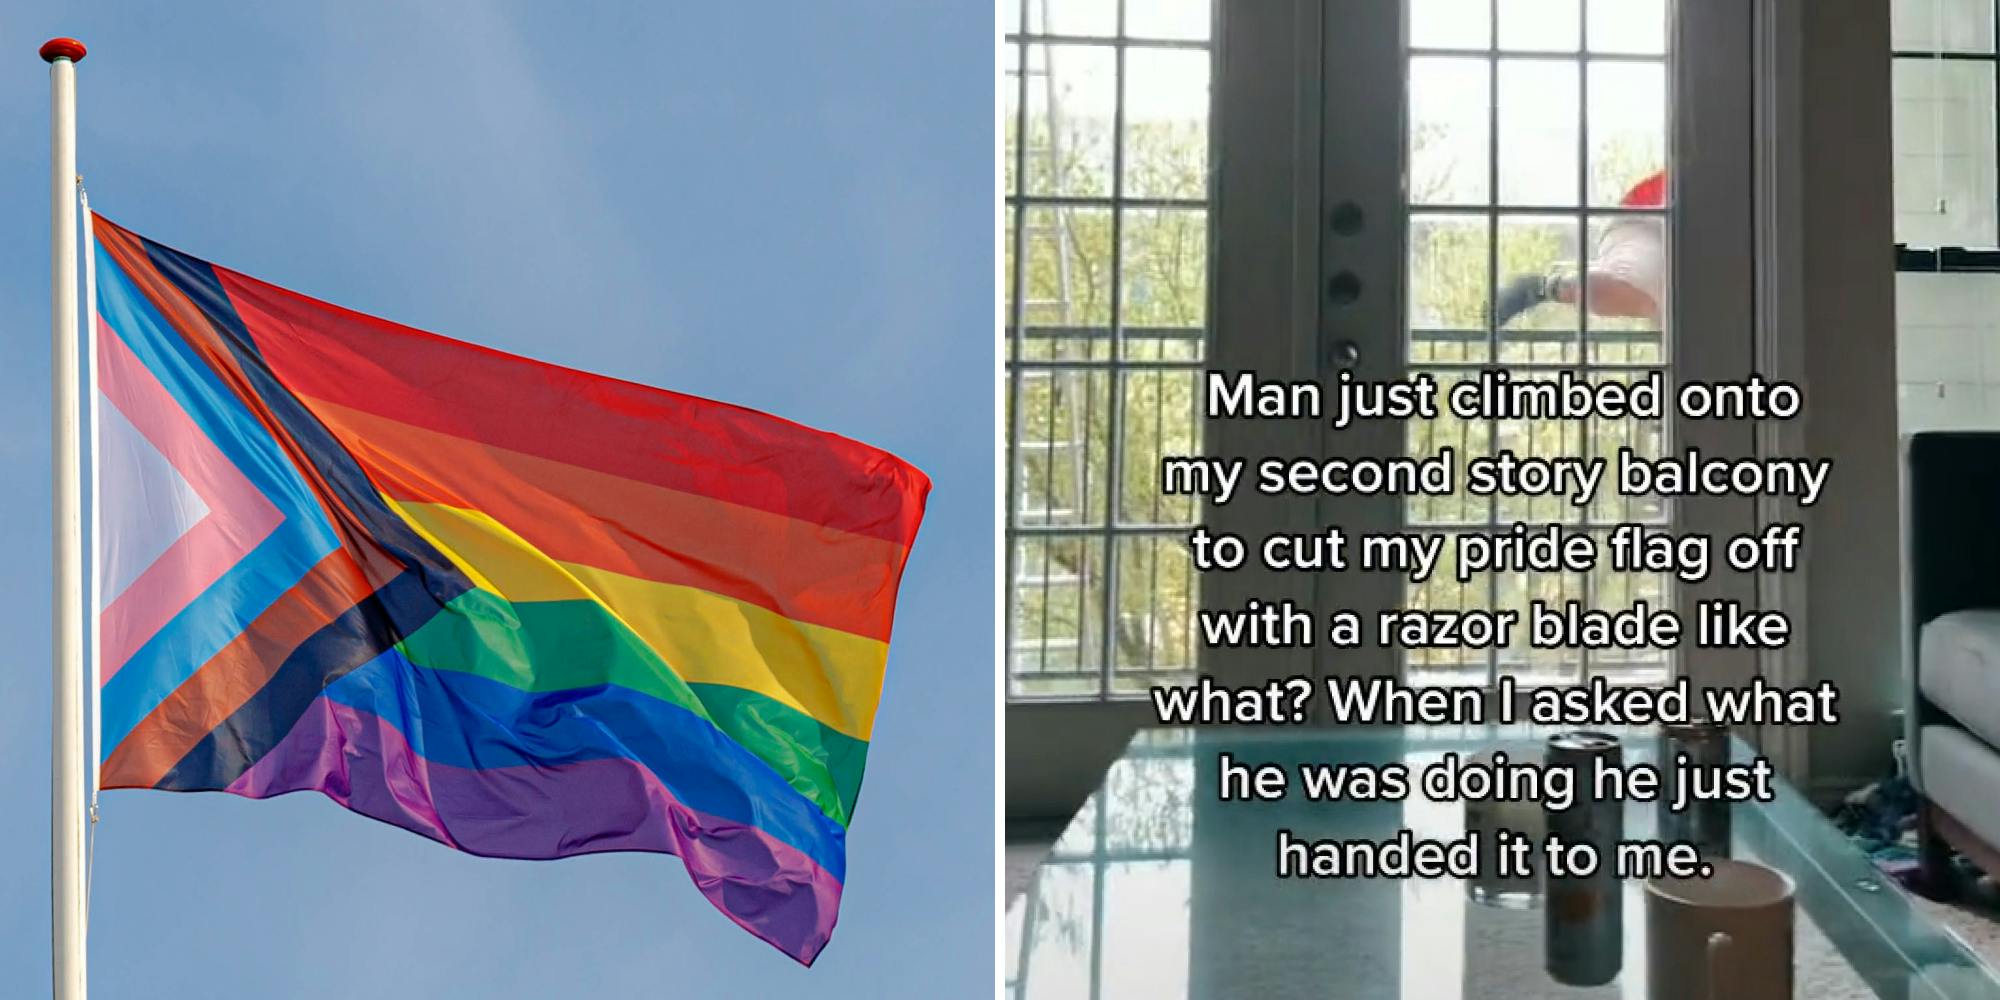 Updated pride flag in sky (l) Woman in house man climbing balcony caption "Man just climbed onto my second story balcony to cut my pride flag off with a razor blade like what? When I asked what he was doing he just handed it to me." (r)